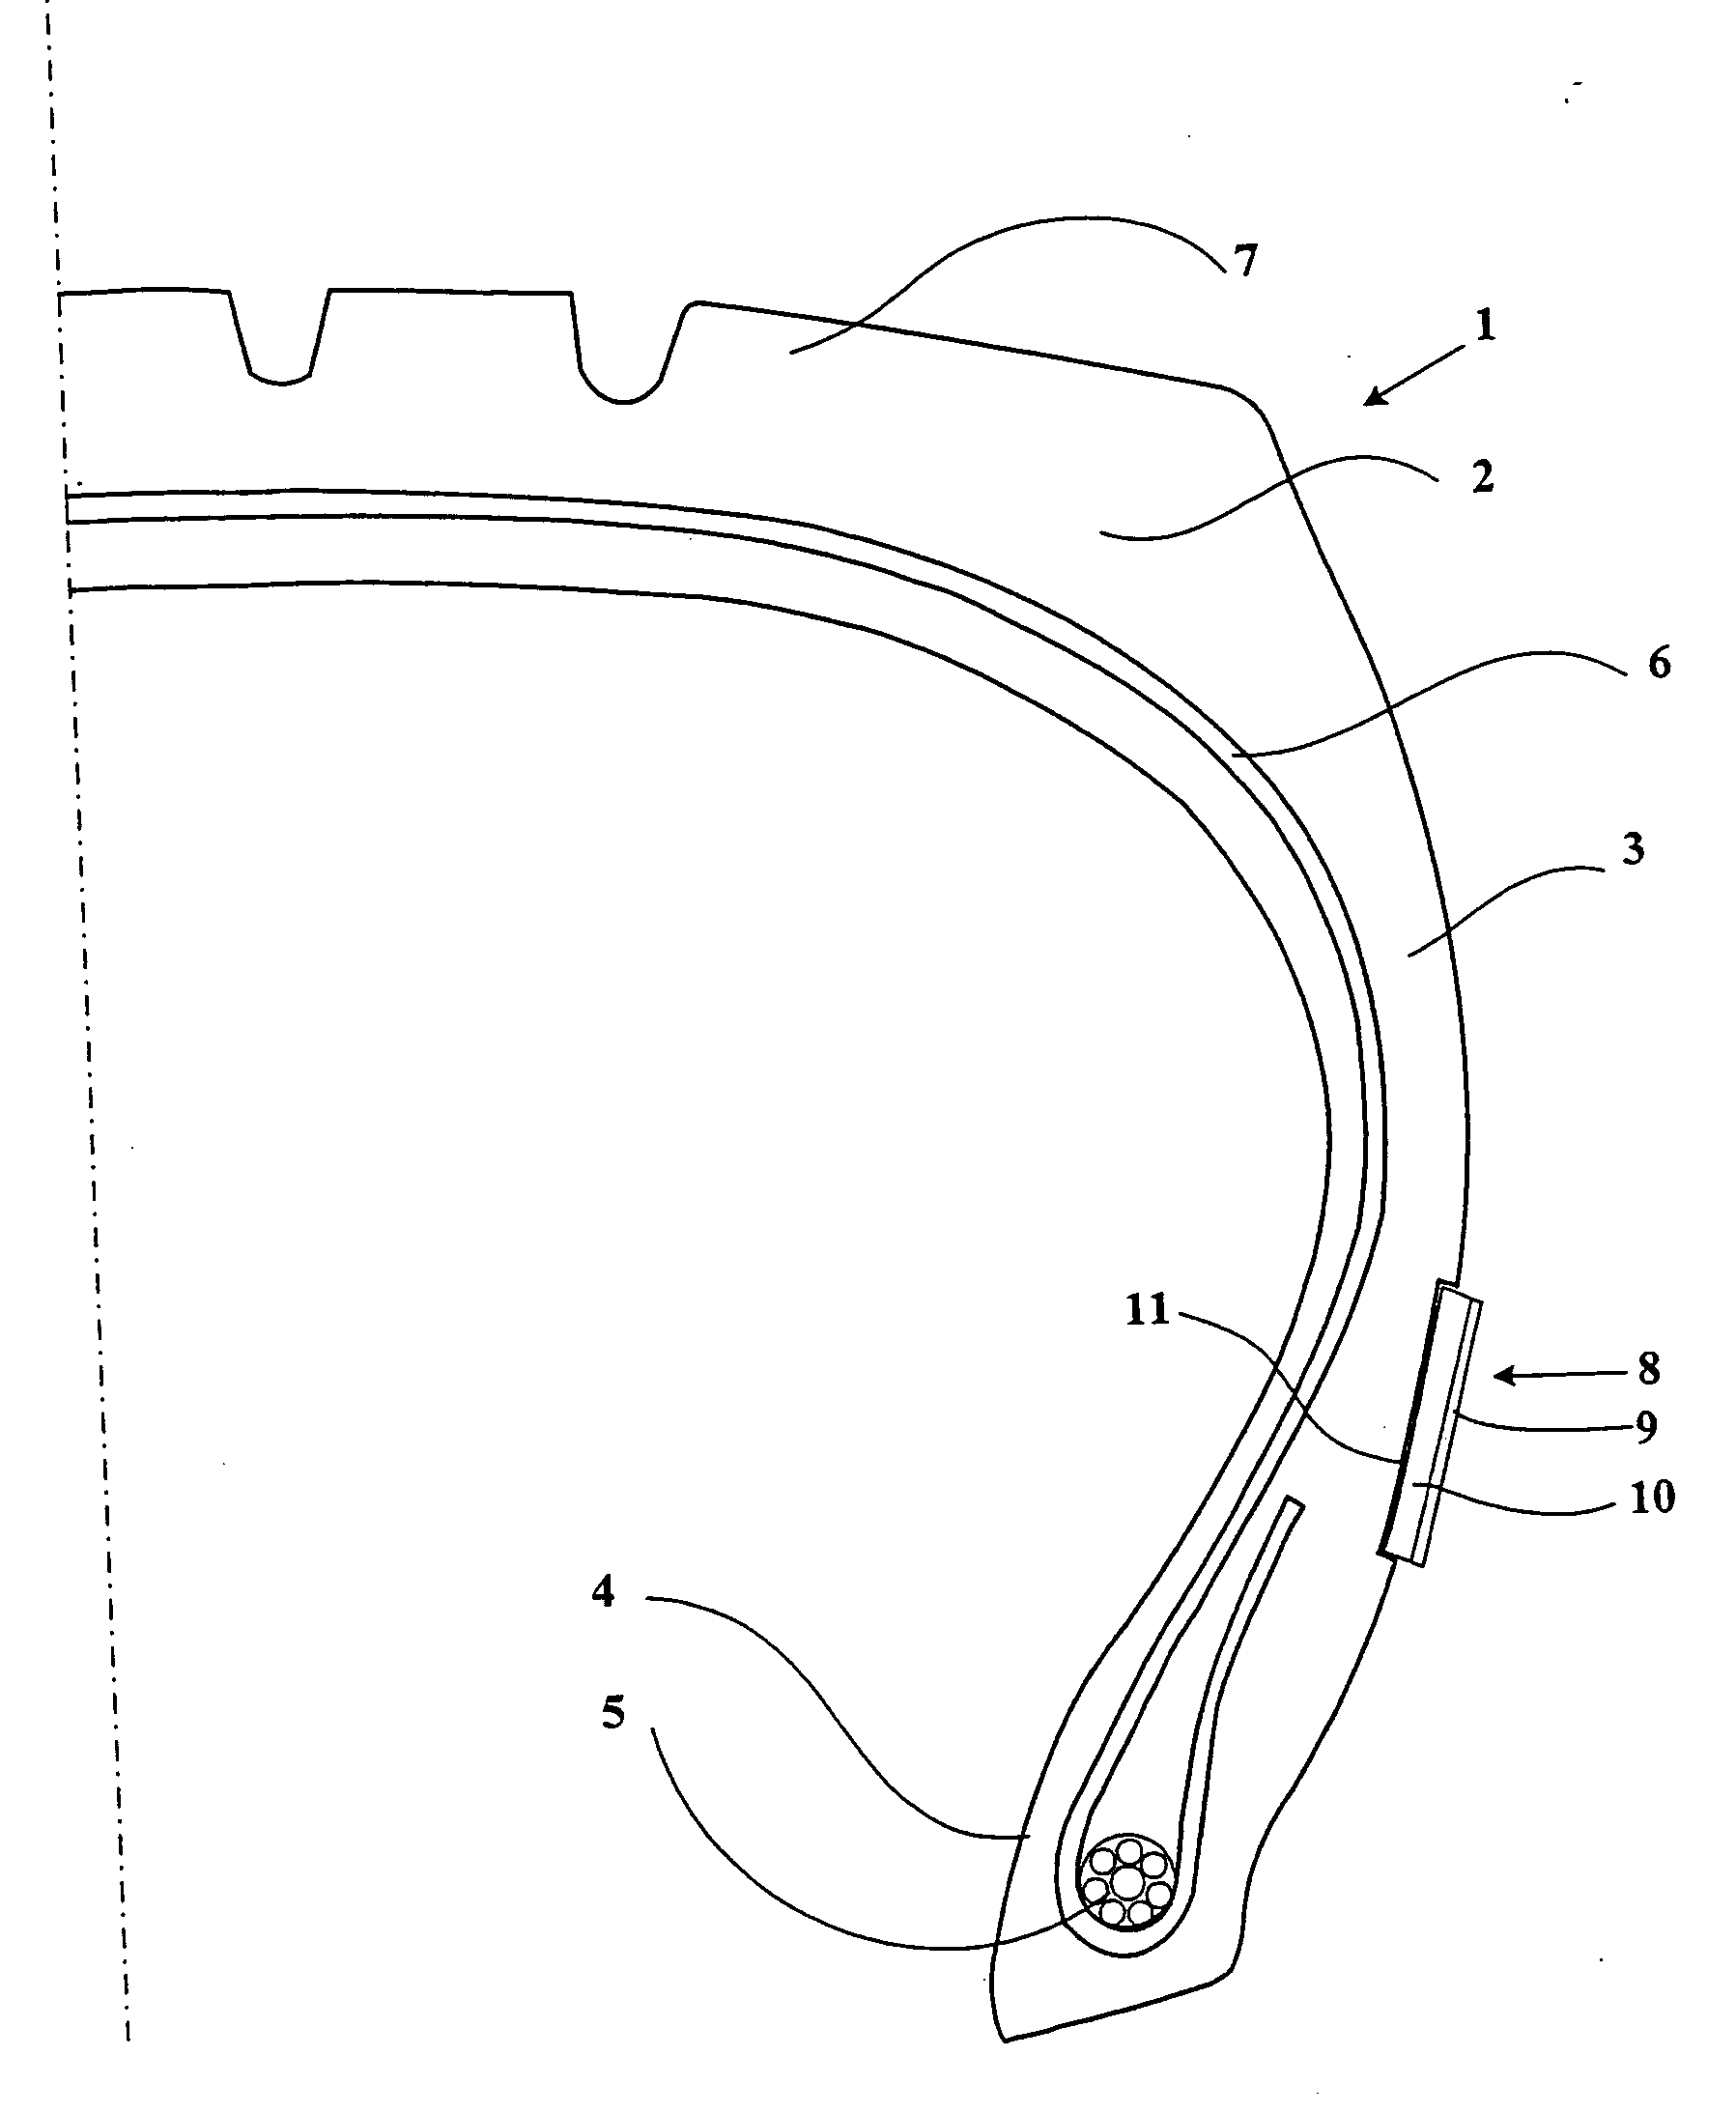 Tire having an element or covering attached to a surface thereof